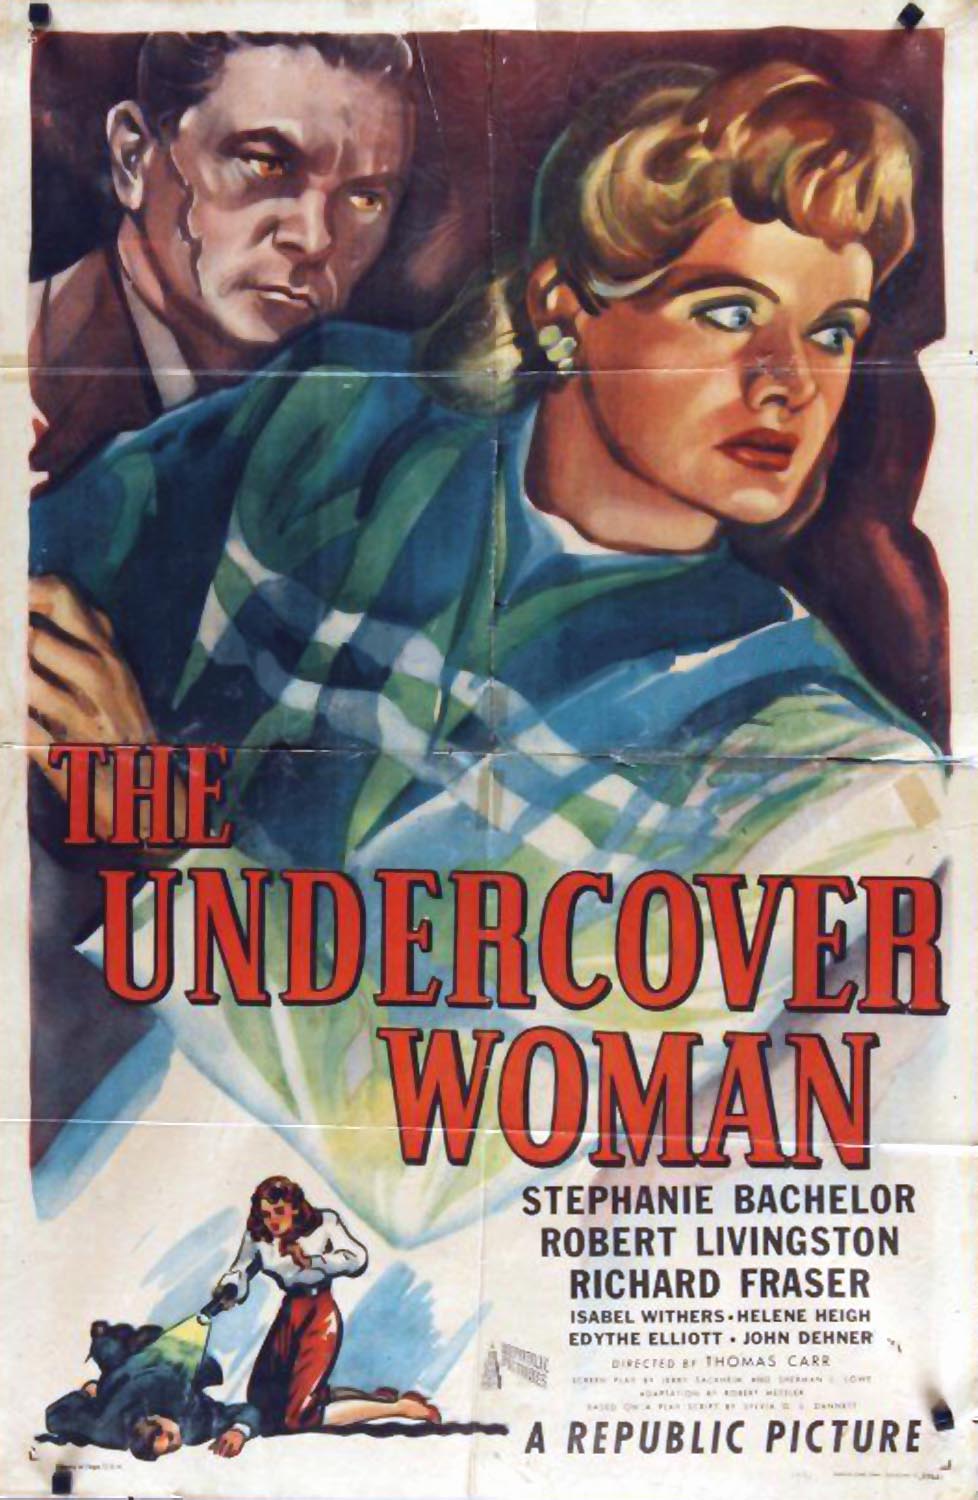 UNDERCOVER WOMAN, THE